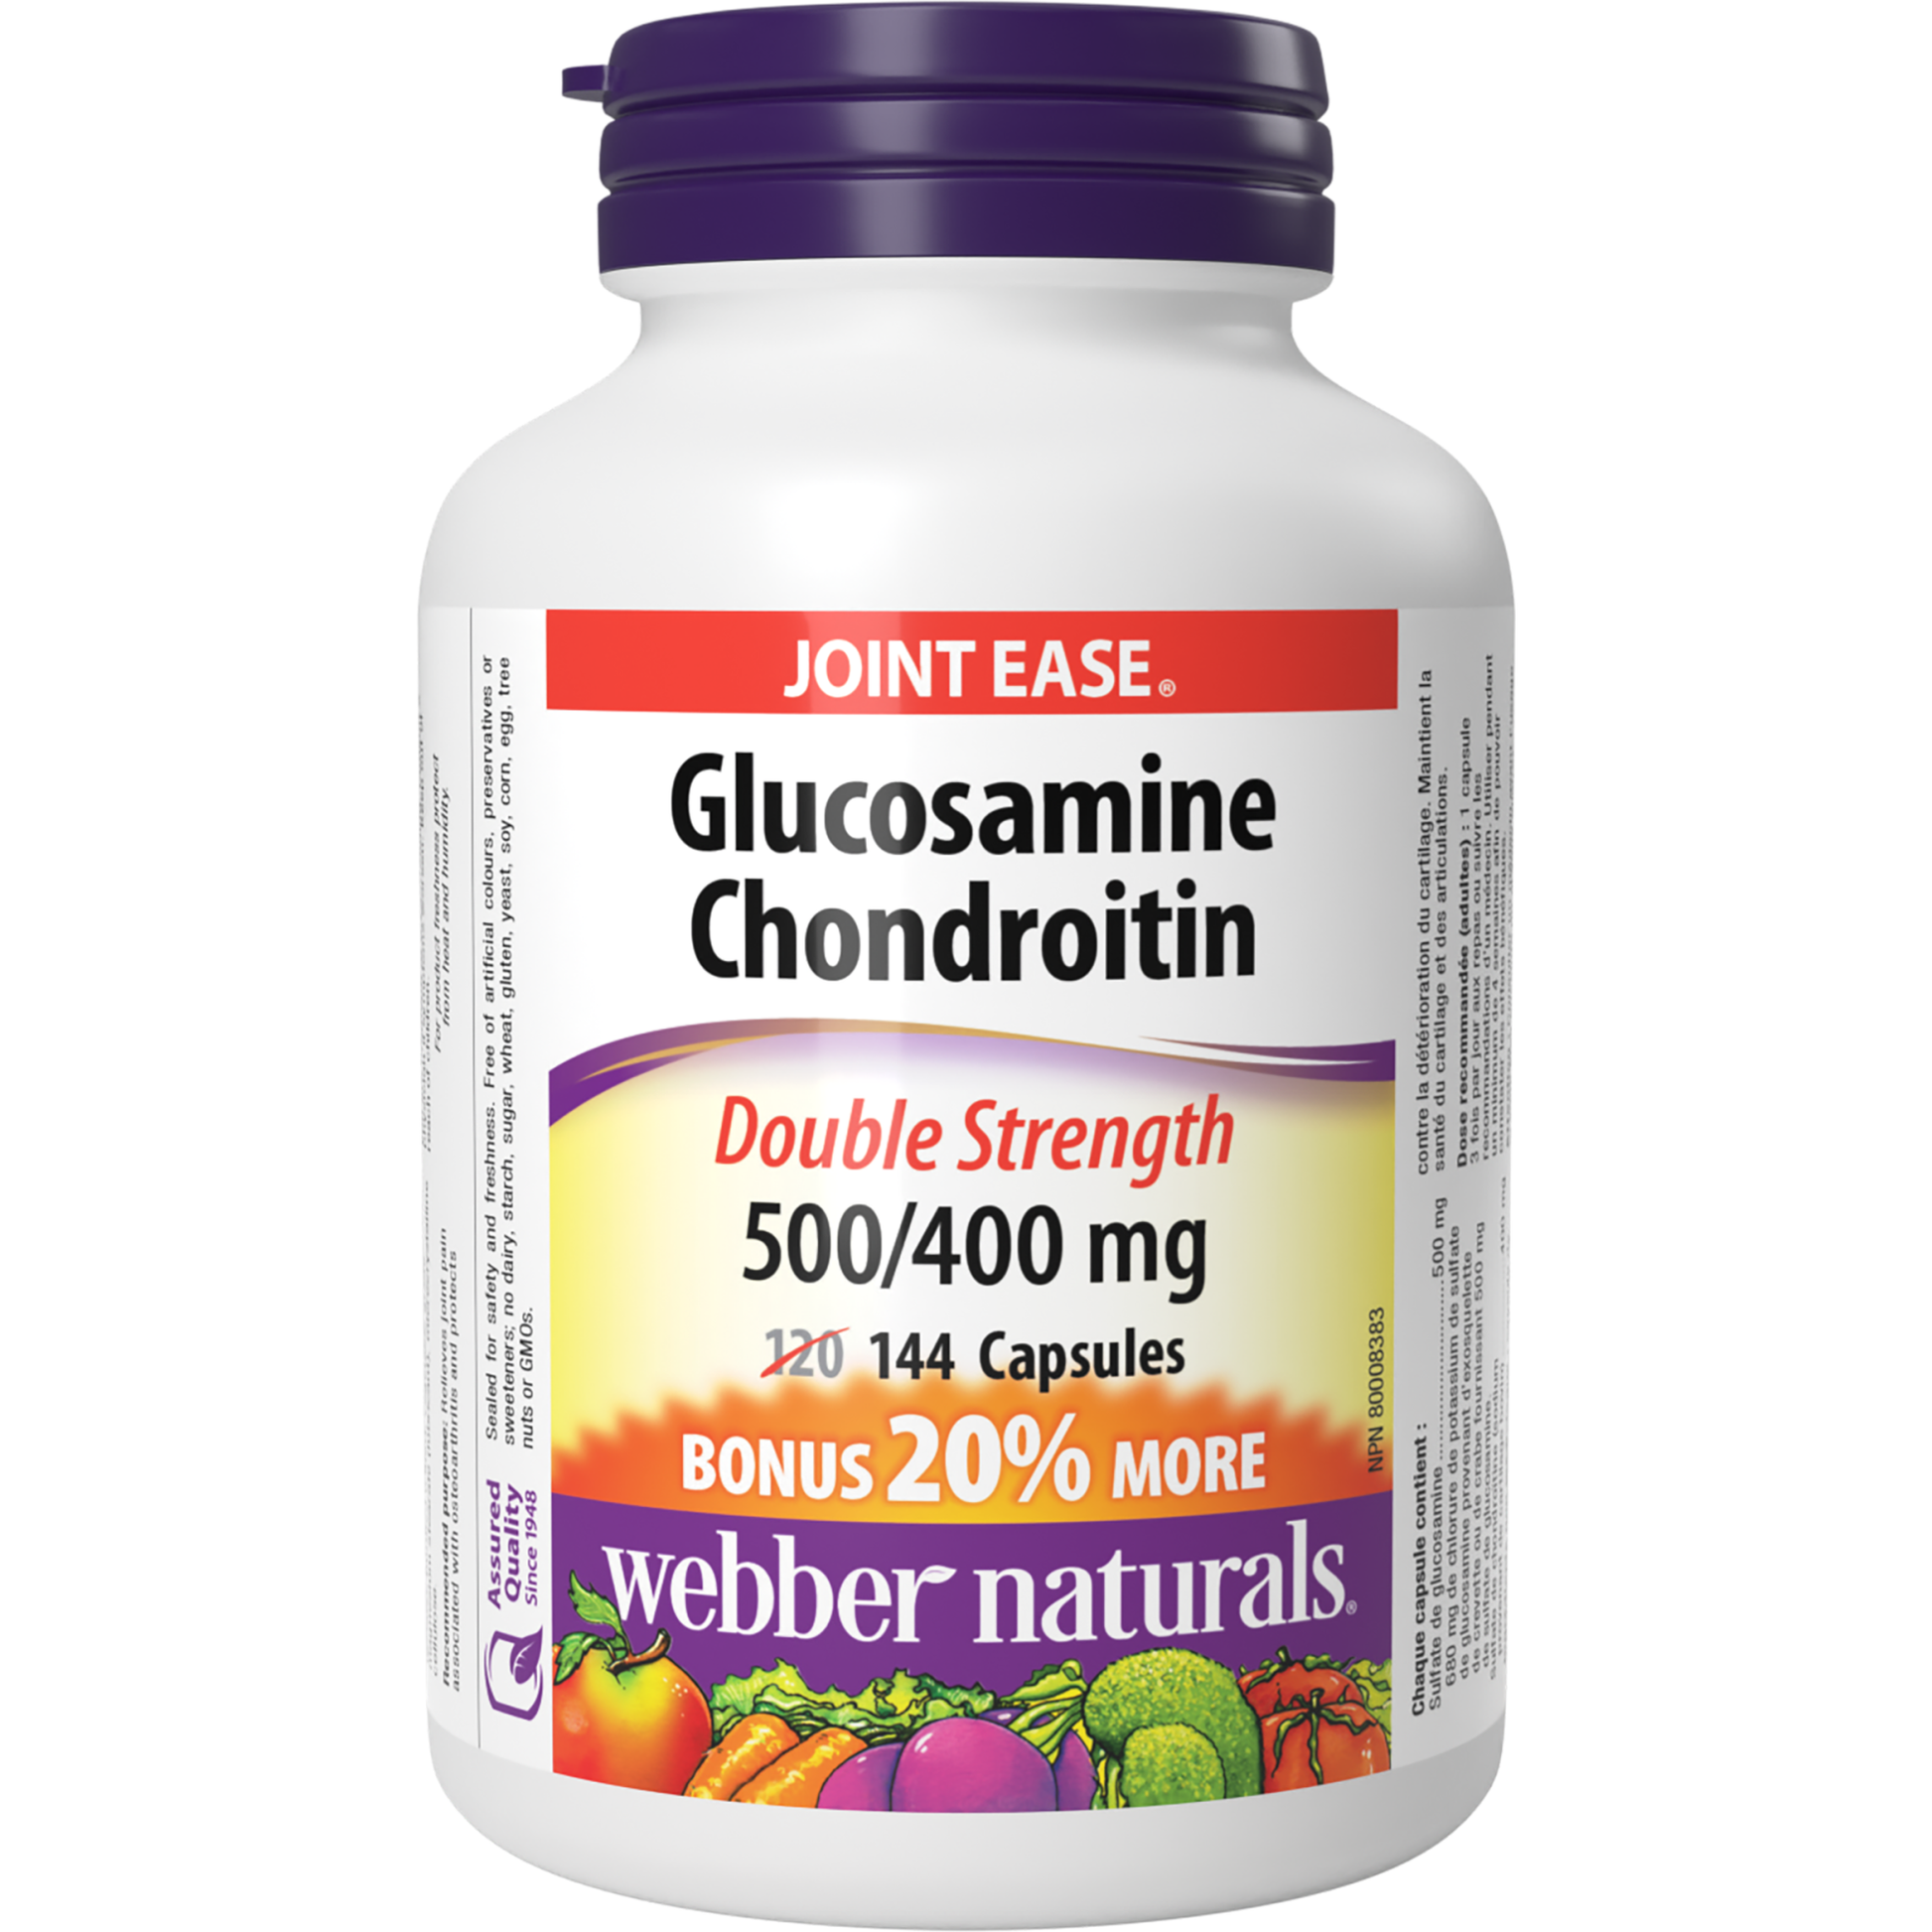 Glucosamine Chondroitin Double Strength 500/400 mg for Webber Naturals|v|hi-res|WN3837